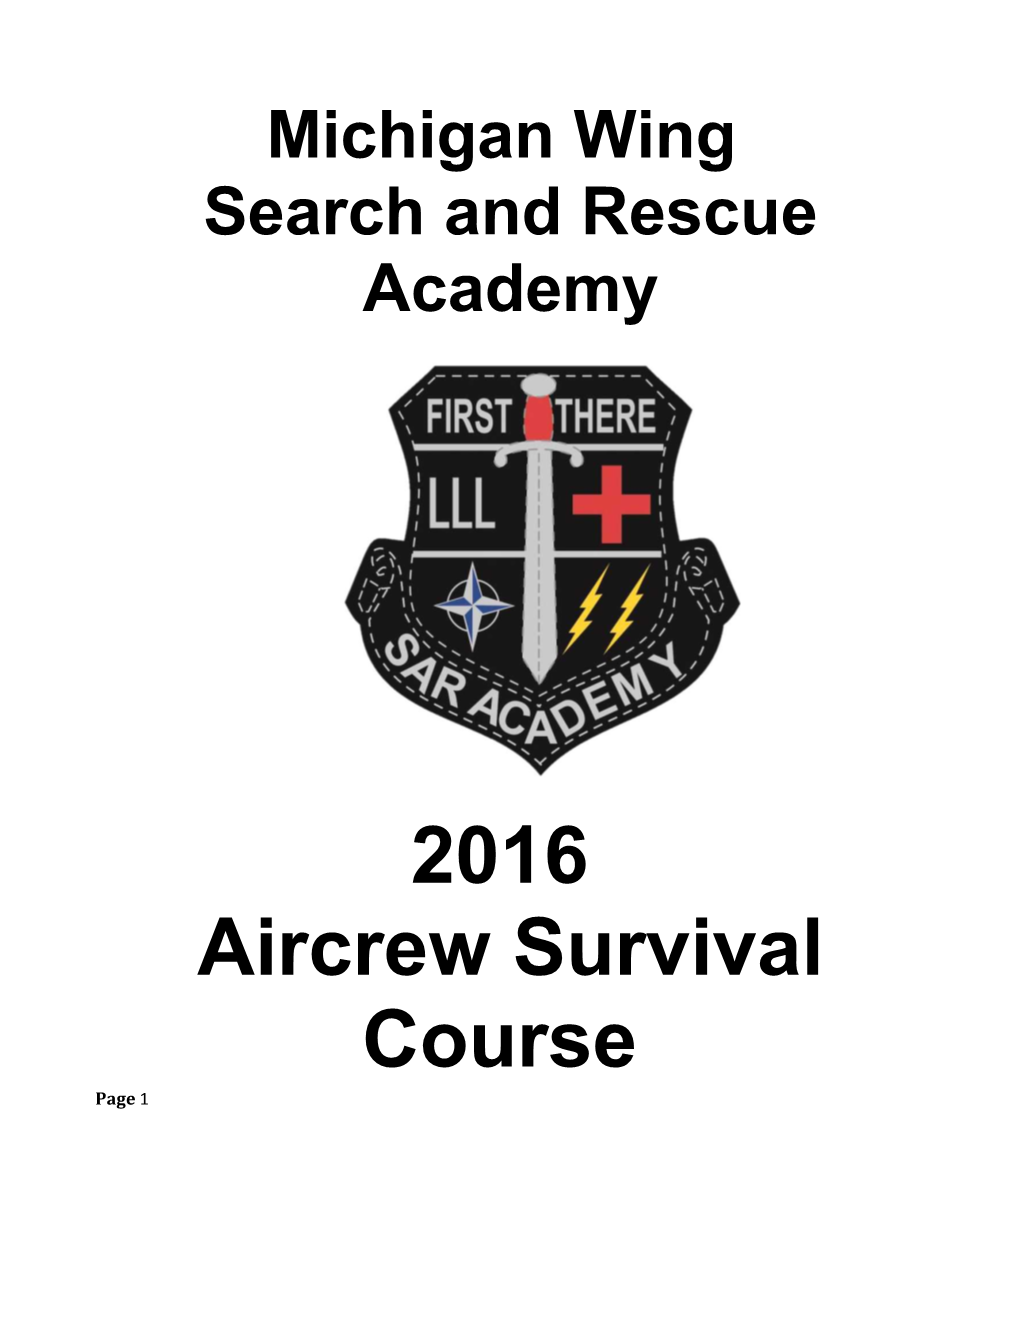 Search and Rescue Academy